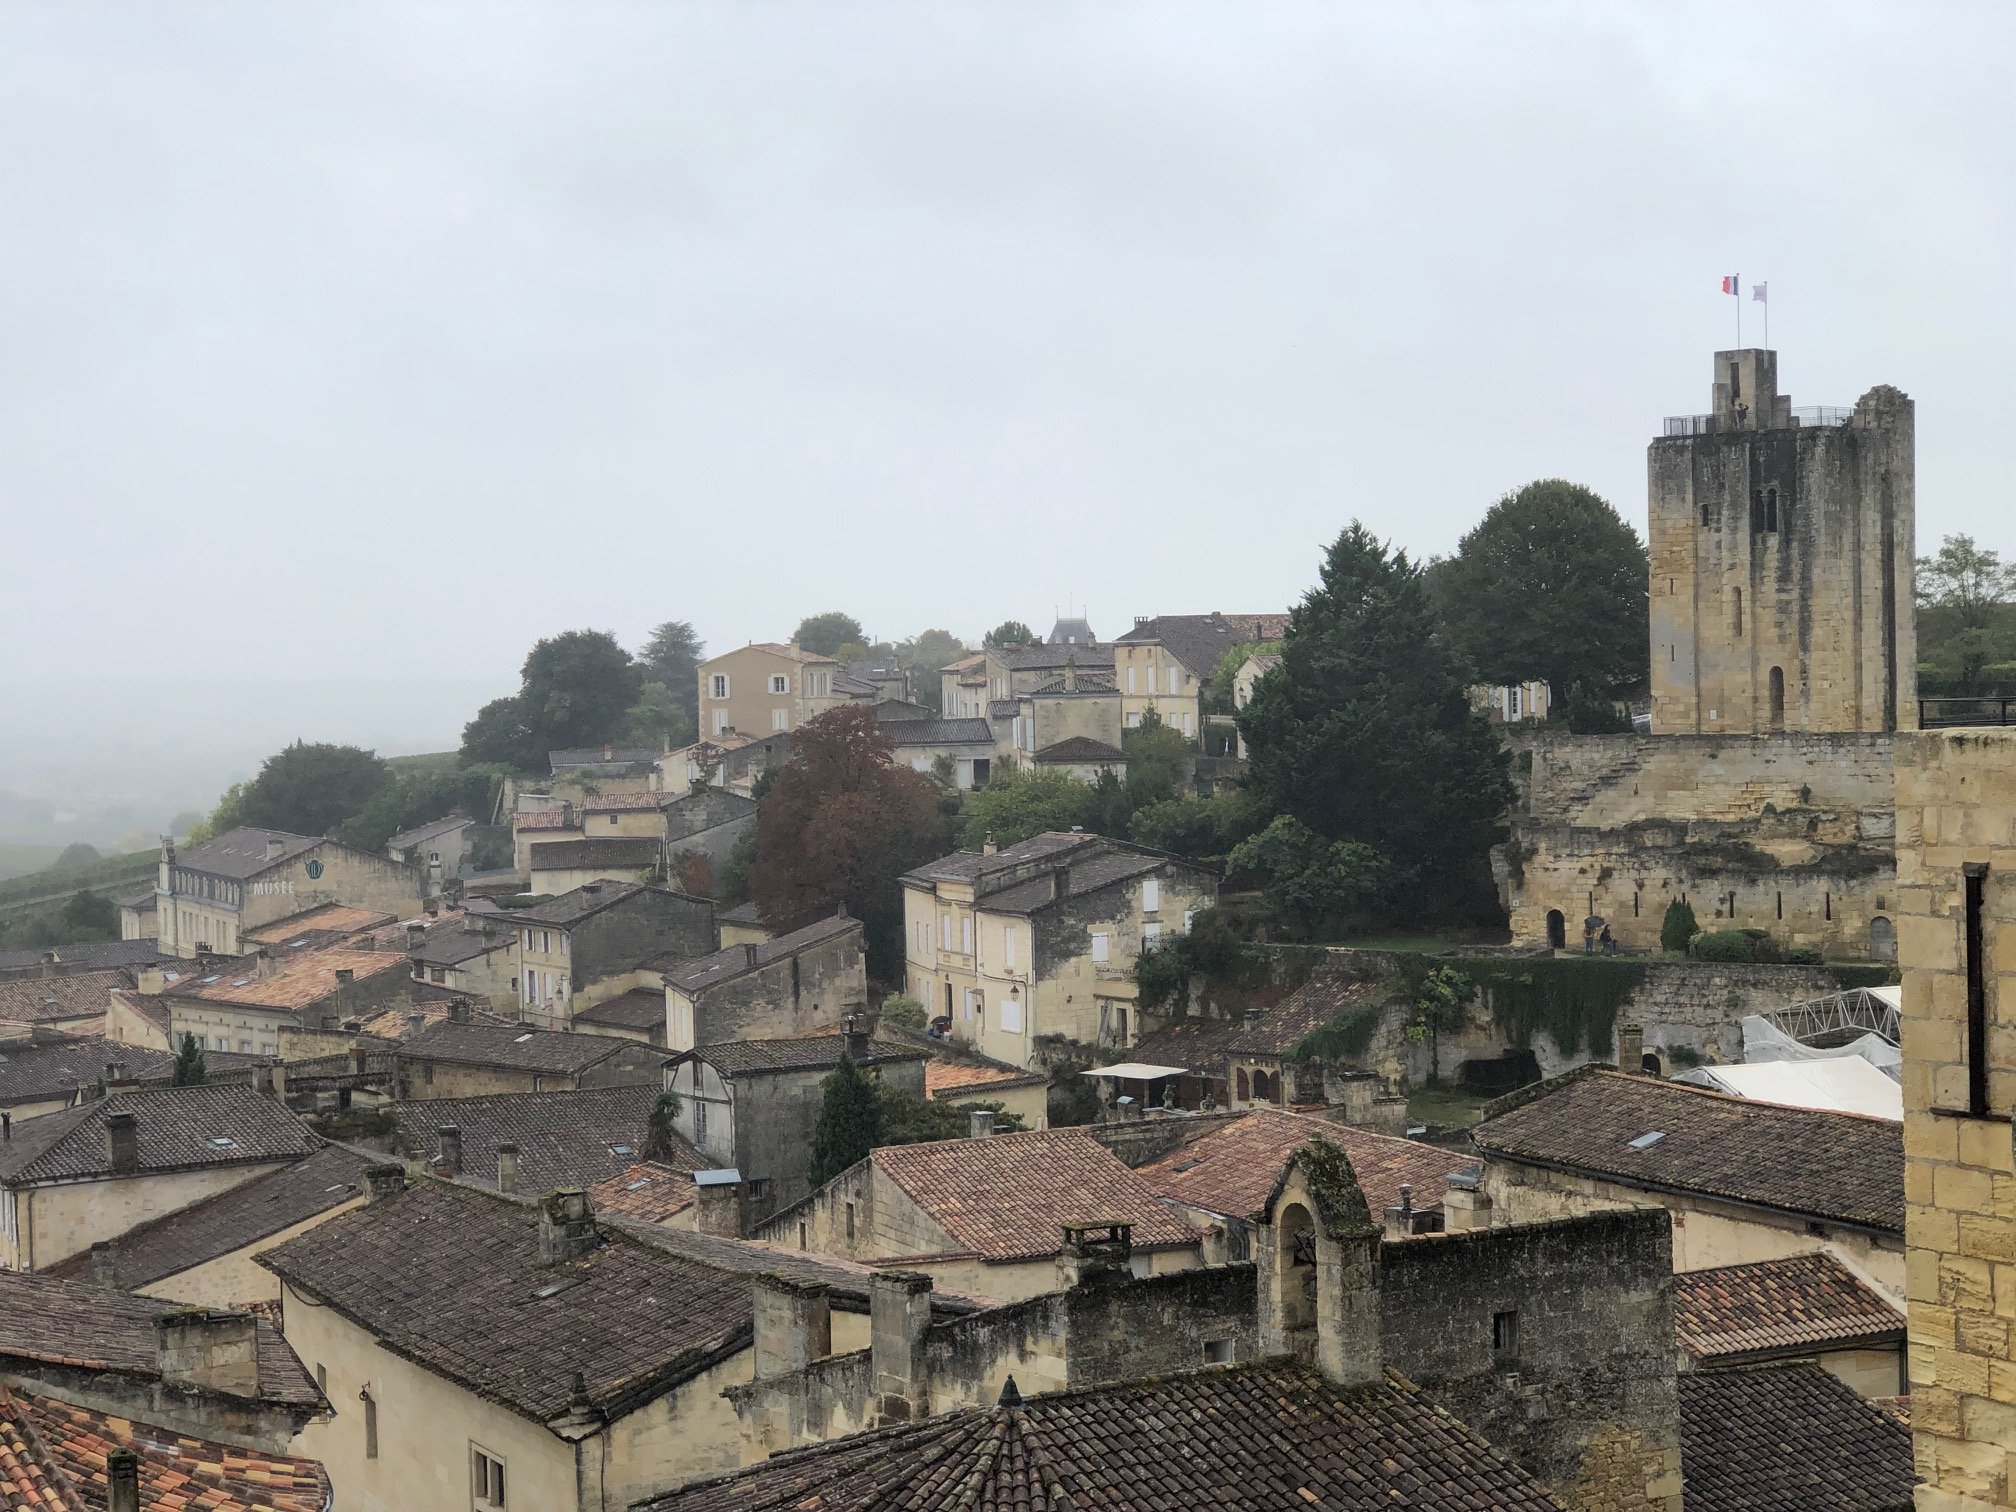  A view of the town of Saint-Emilion. 